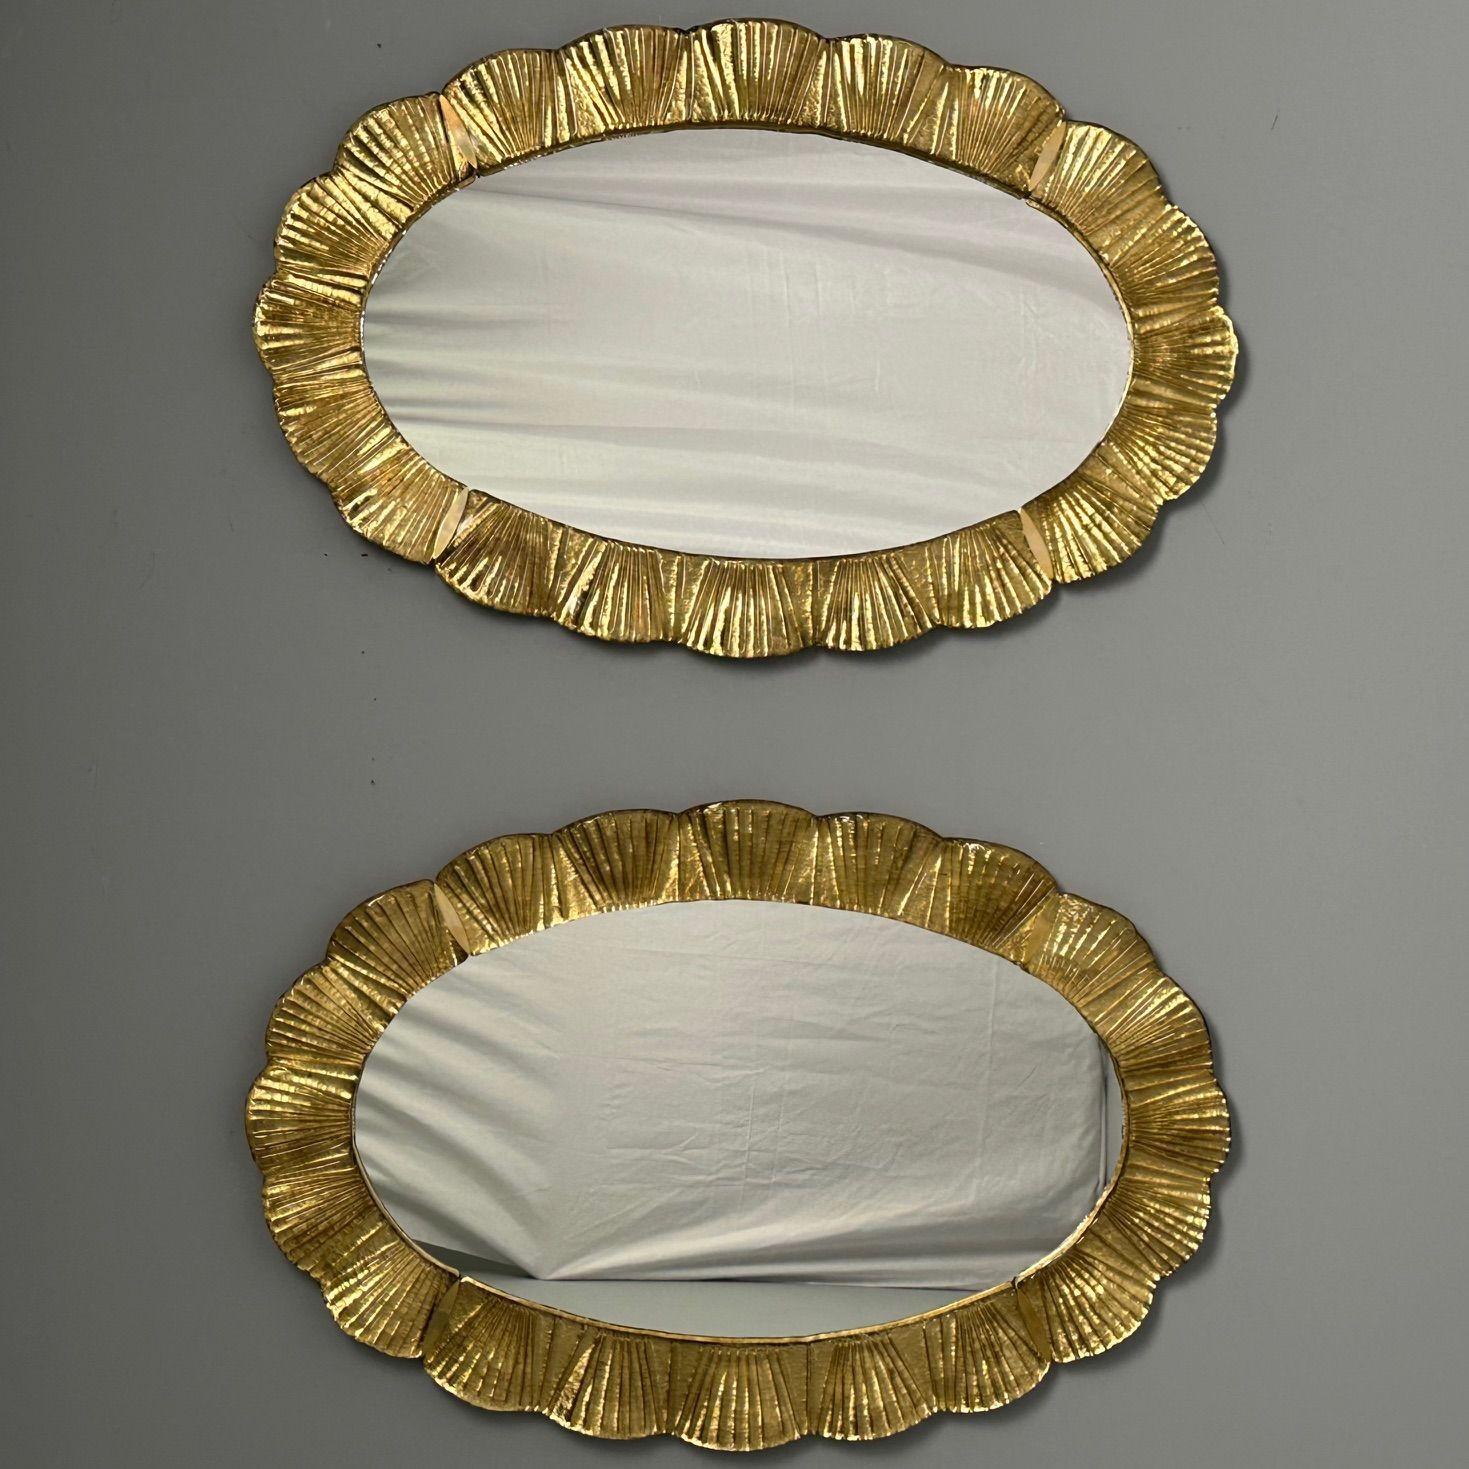 Contemporary, Oval Wall Mirrors, Scallop Motif, Murano Glass, Gilt Gold, Italy For Sale 8